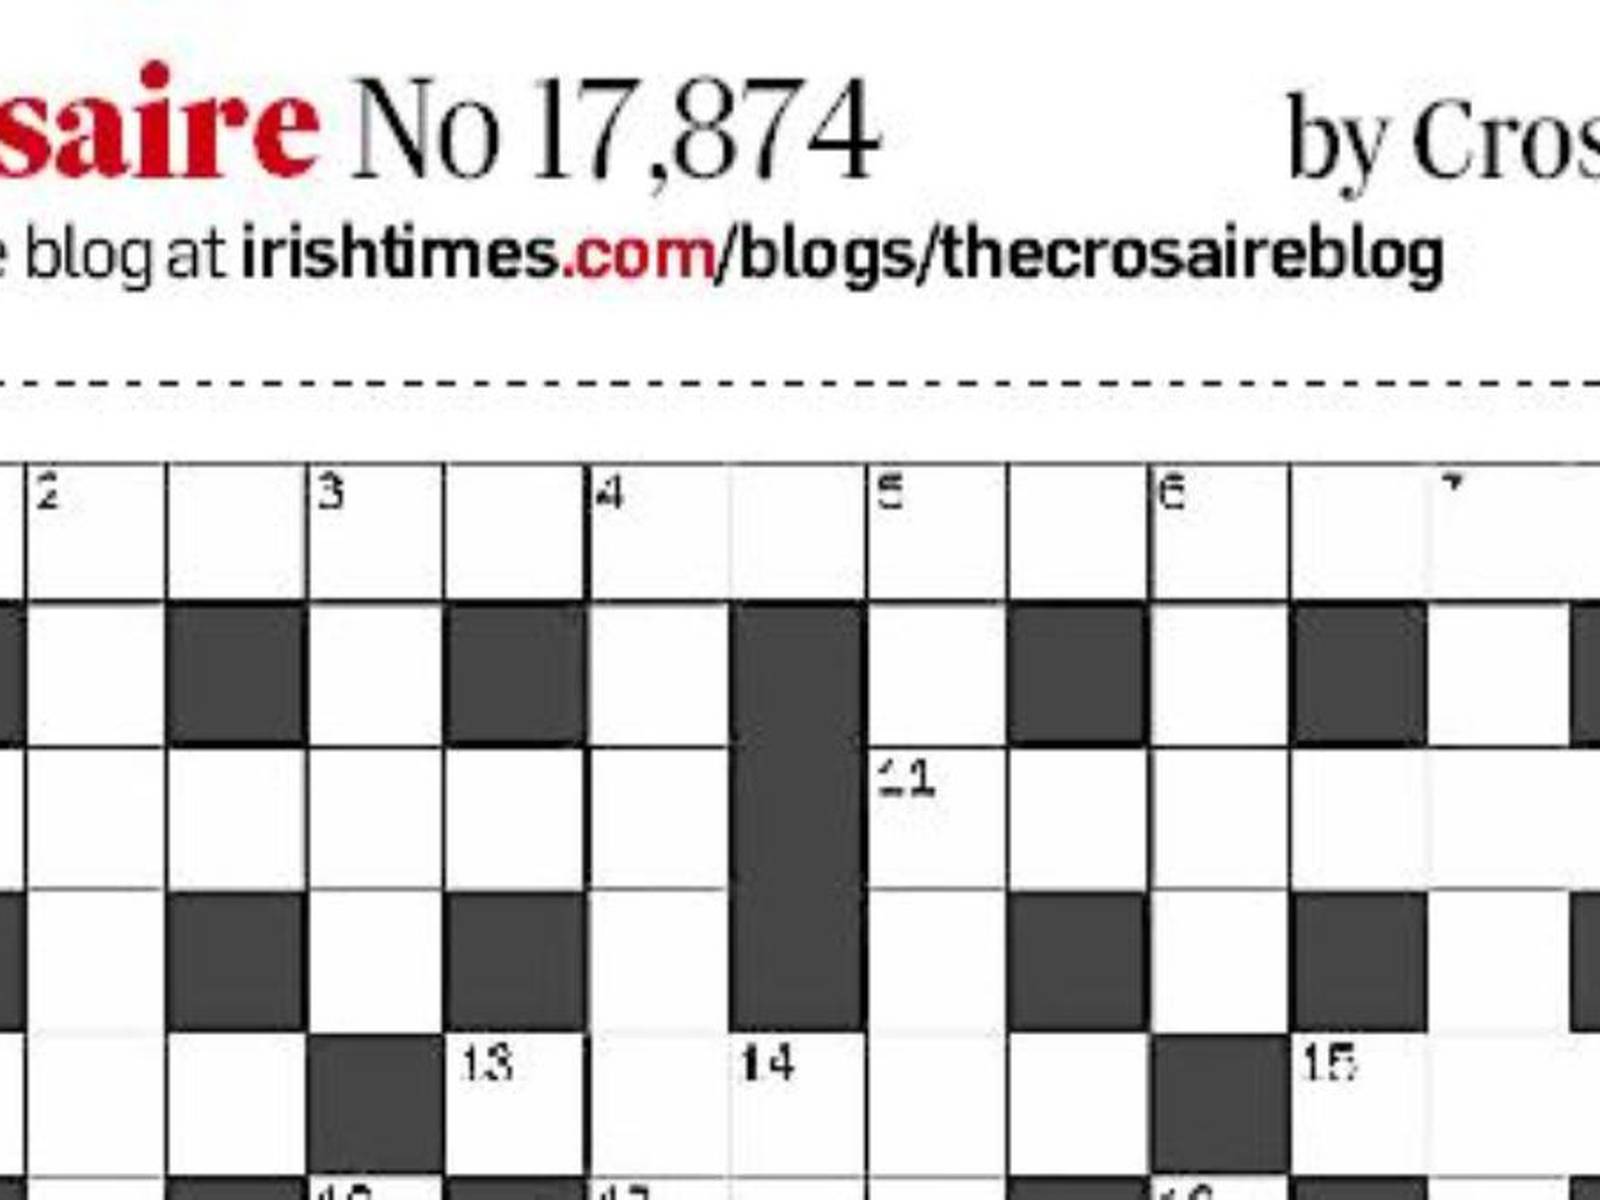 Beginner's guide to solving The Times crossword 